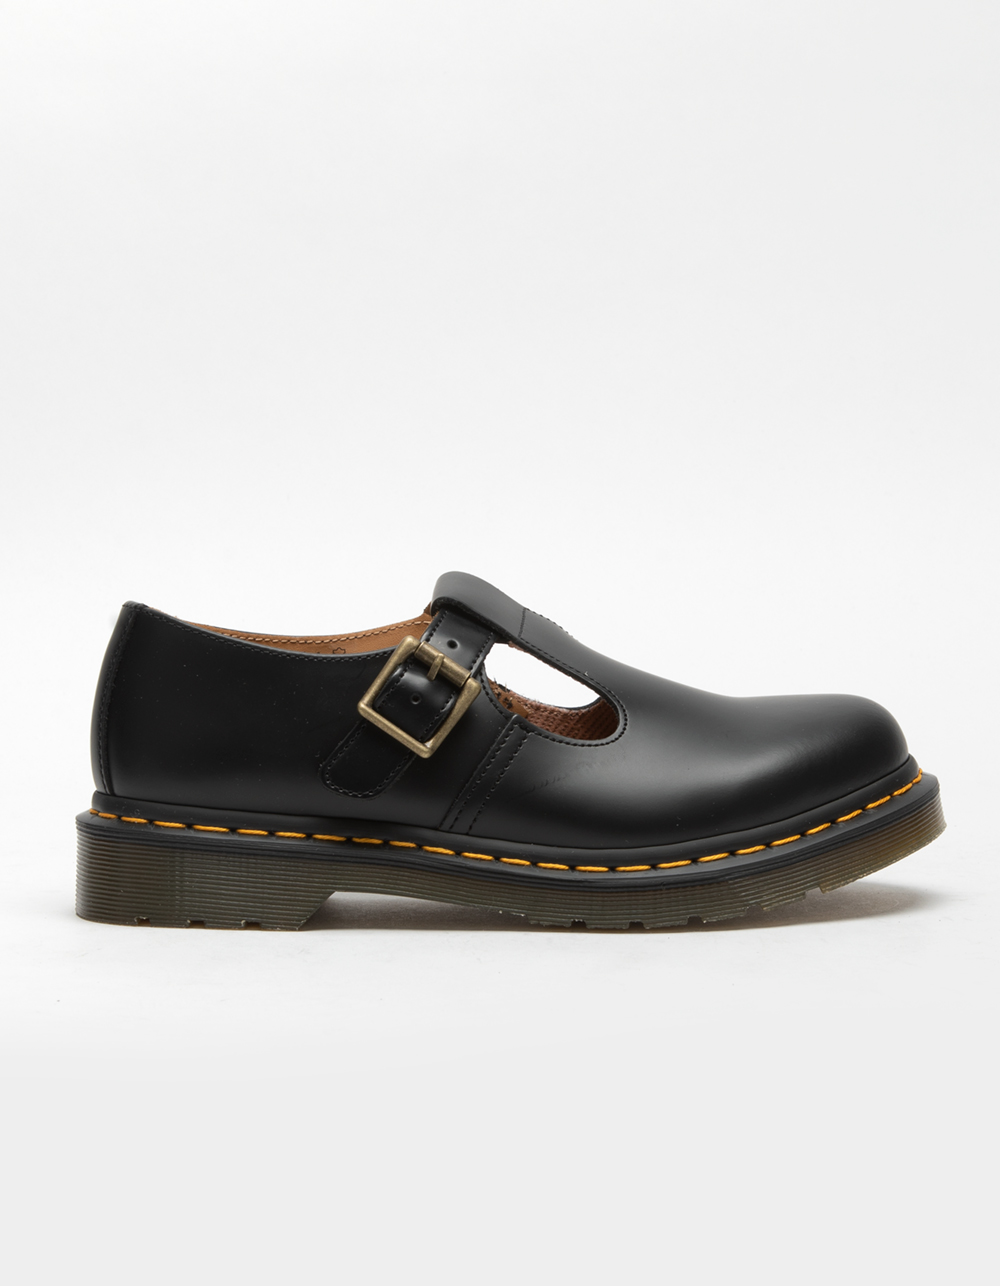 DR. MARTENS Polley Womens Shoes - BLACK | Tillys